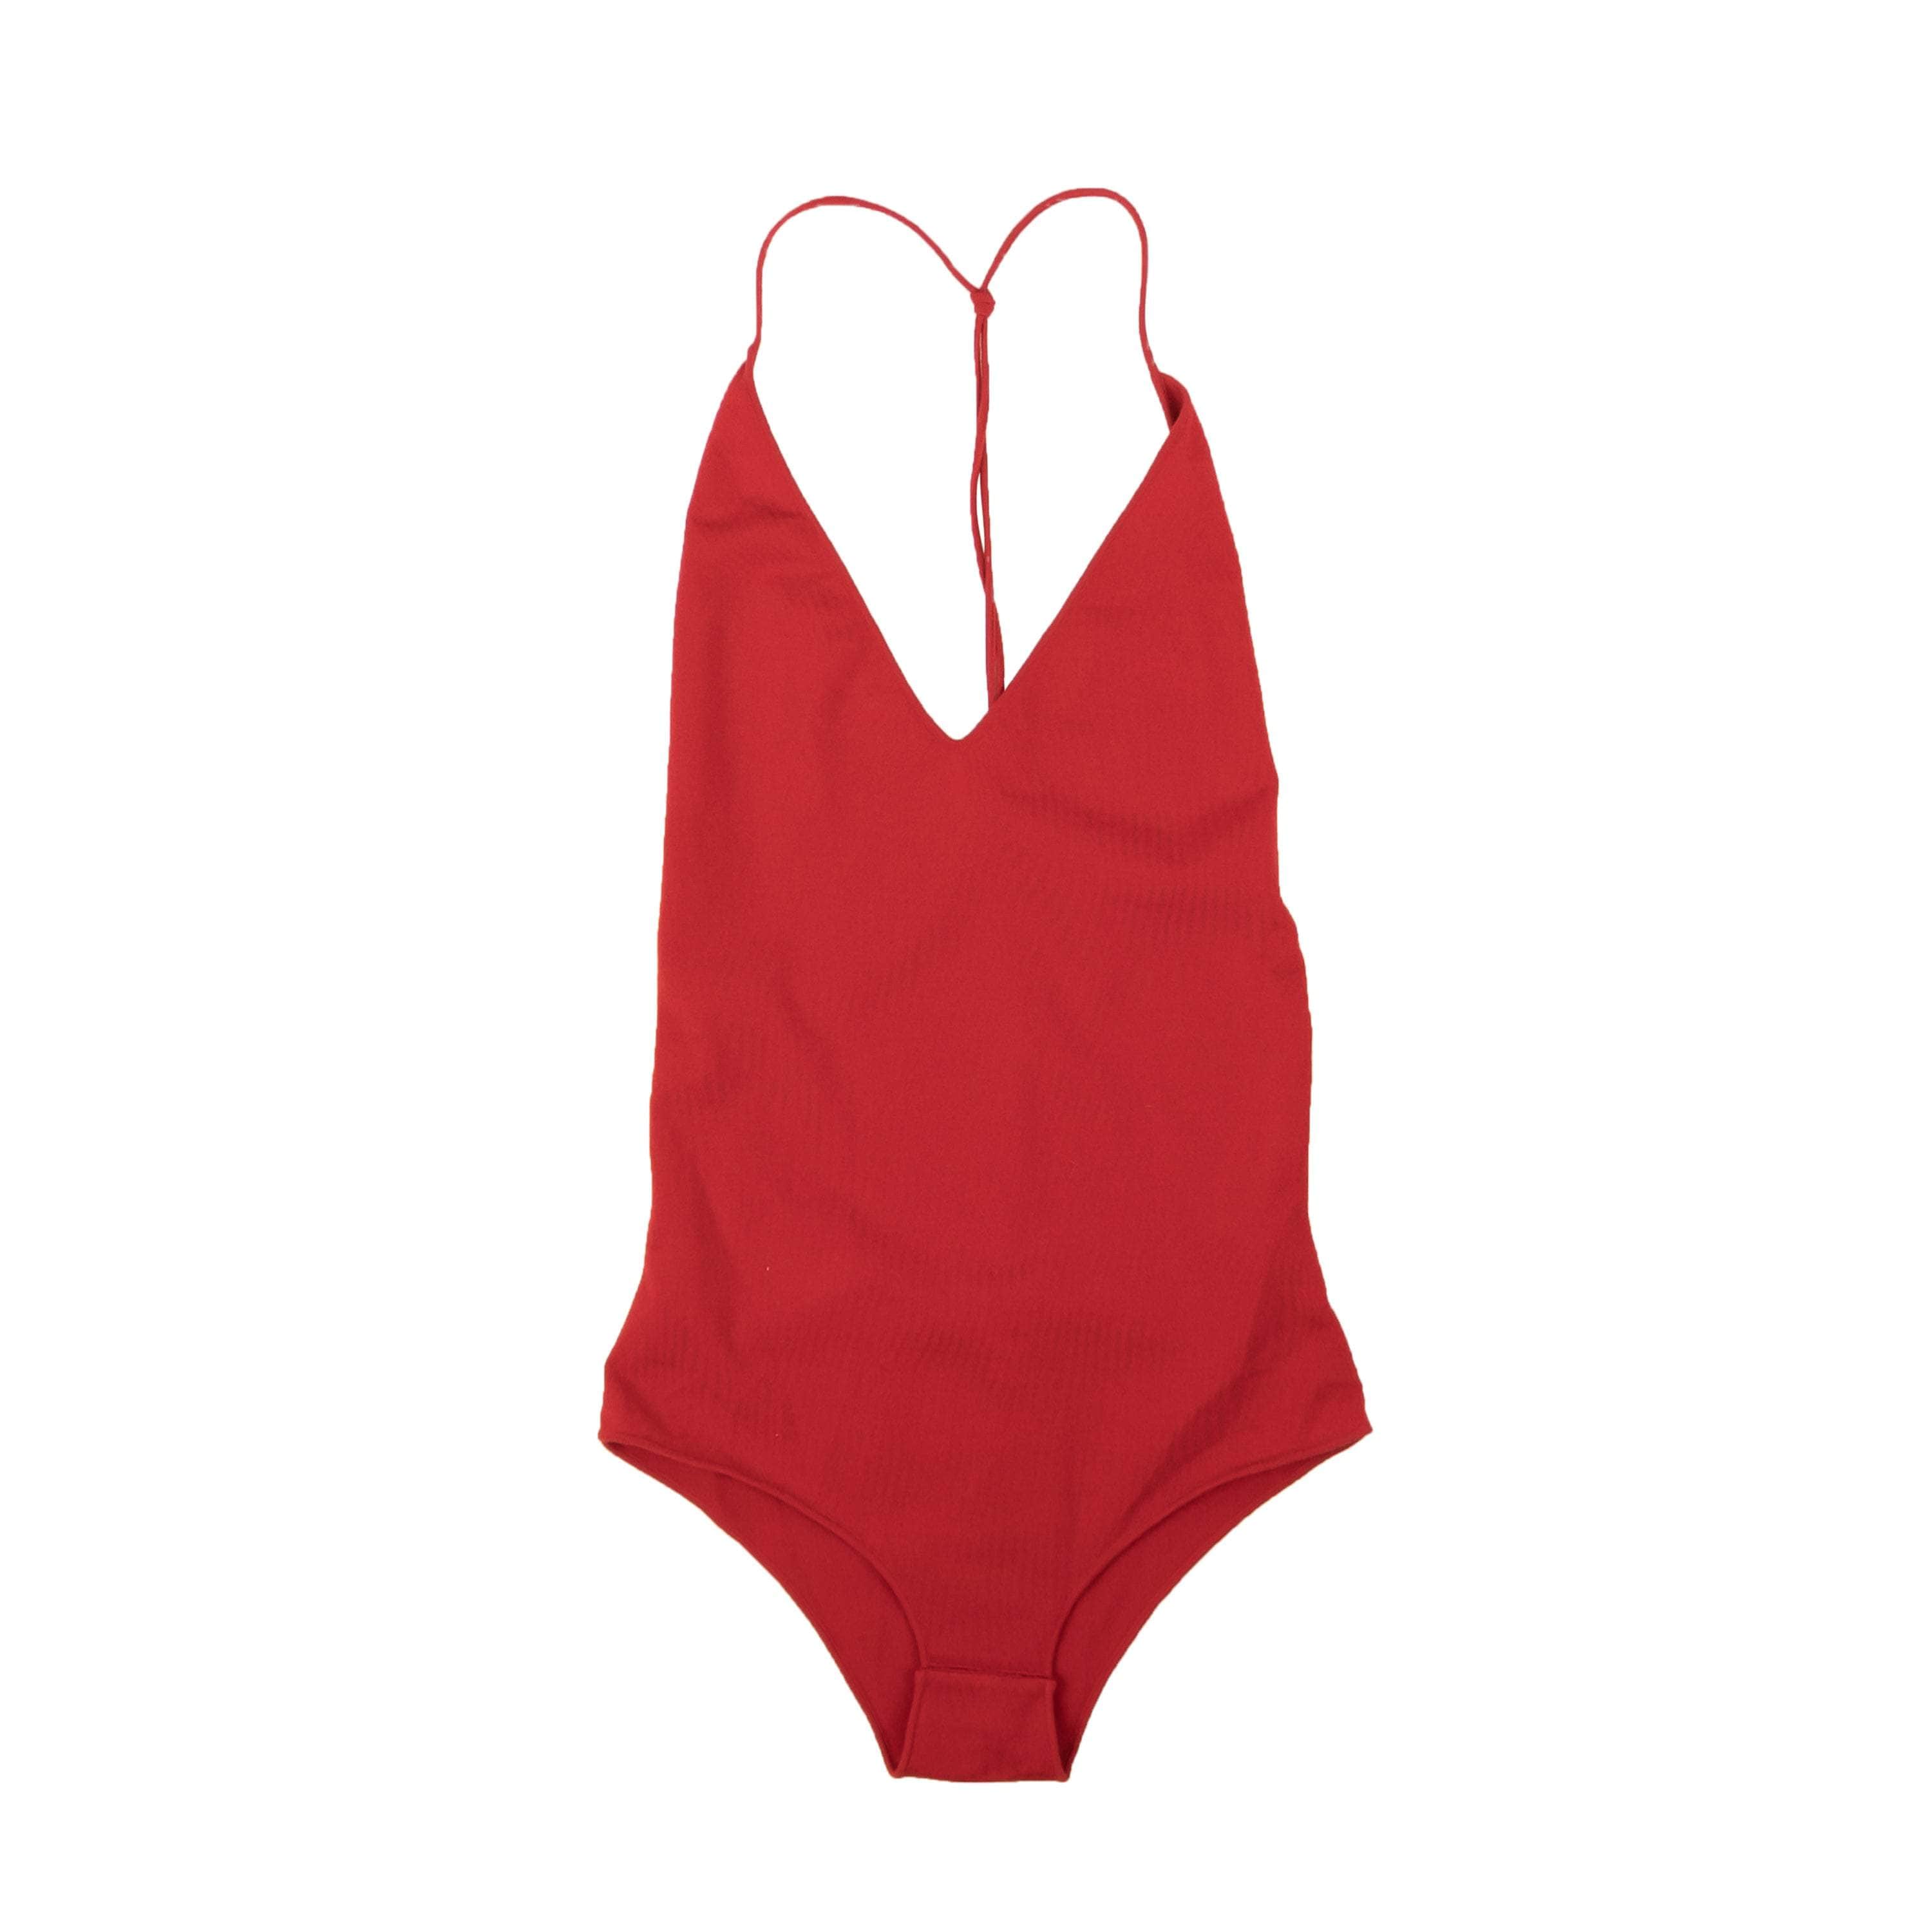 Bottega Veneta 1000-2000, channelenable-all, chicmi, couponcollection, gender-womens, main-clothing, size-m, size-s, womens-bodysuits S Red Knit Cashmere Blend Bodysuit BTV-XTPS-0012/S BTV-XTPS-0012/S